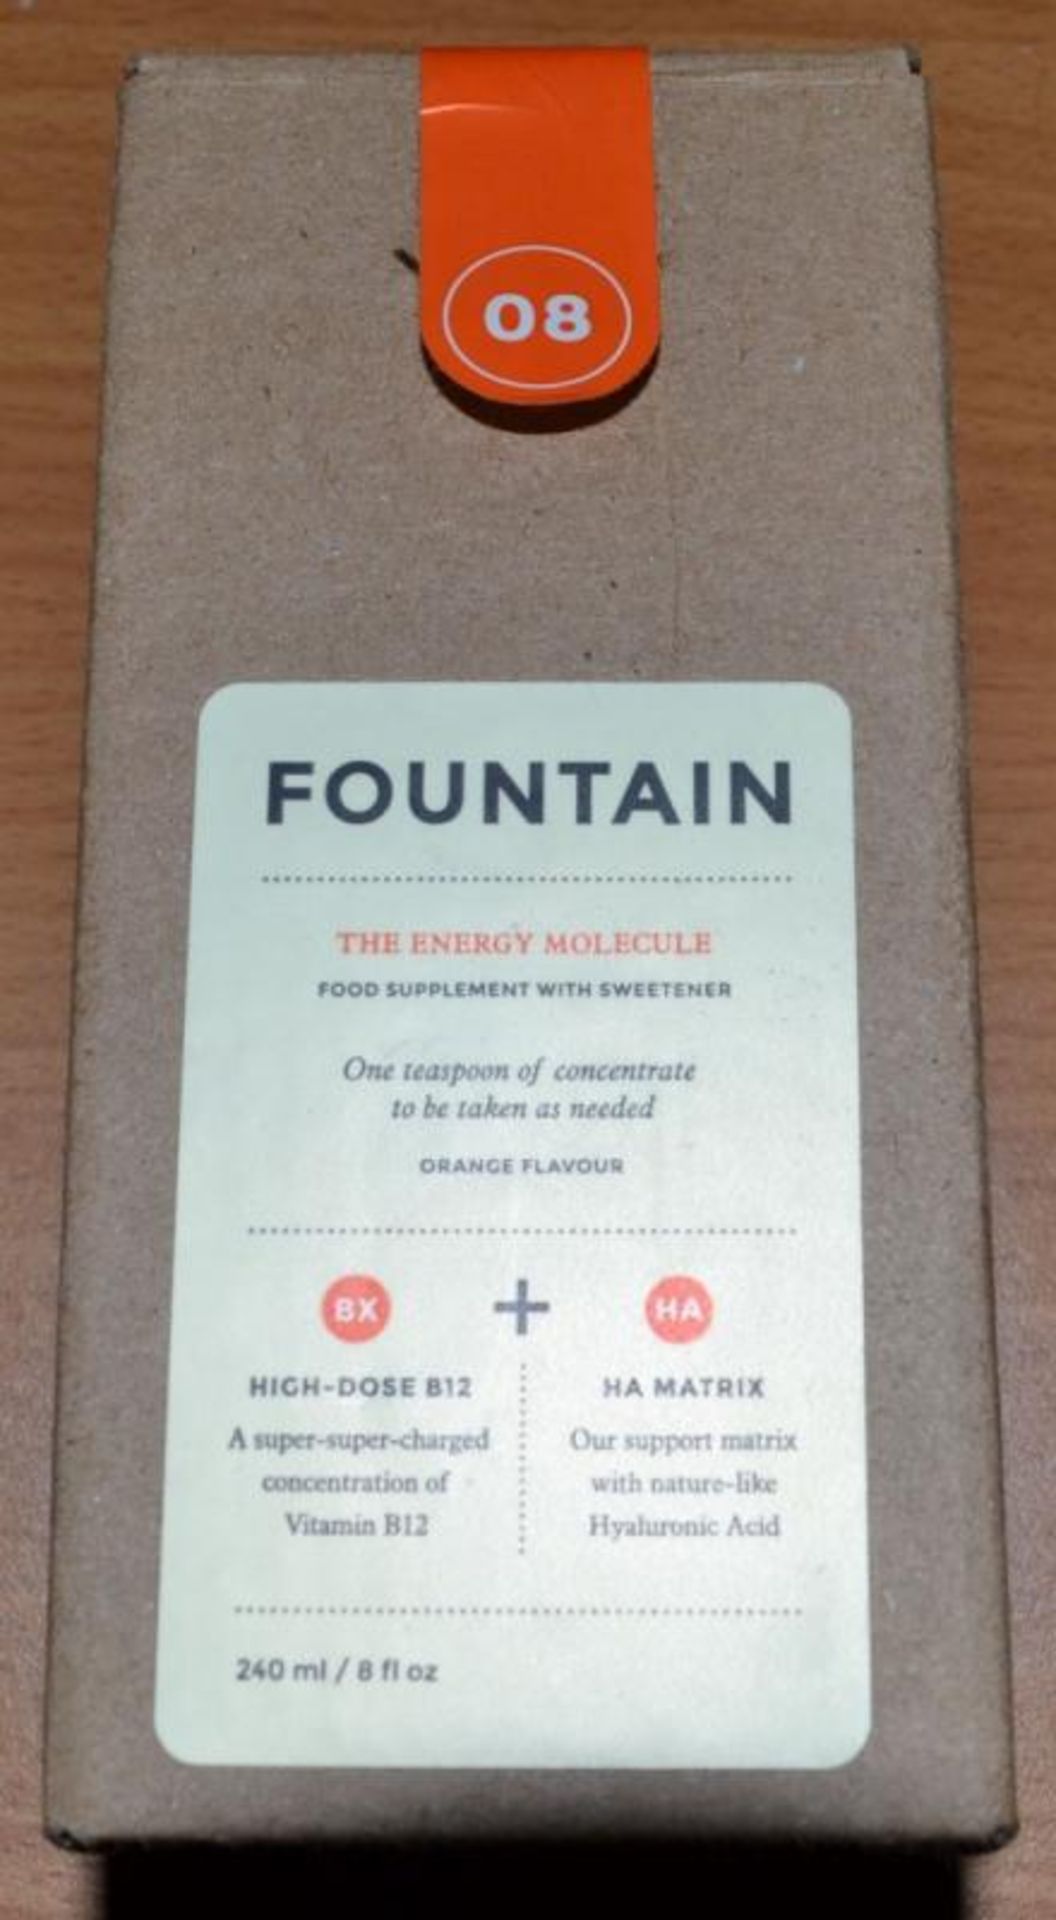 10 x 240ml Bottles of Fountain, The Energy Molecule Supplement - New & Boxed - CL185 - Ref: DRT0643 - Image 6 of 7